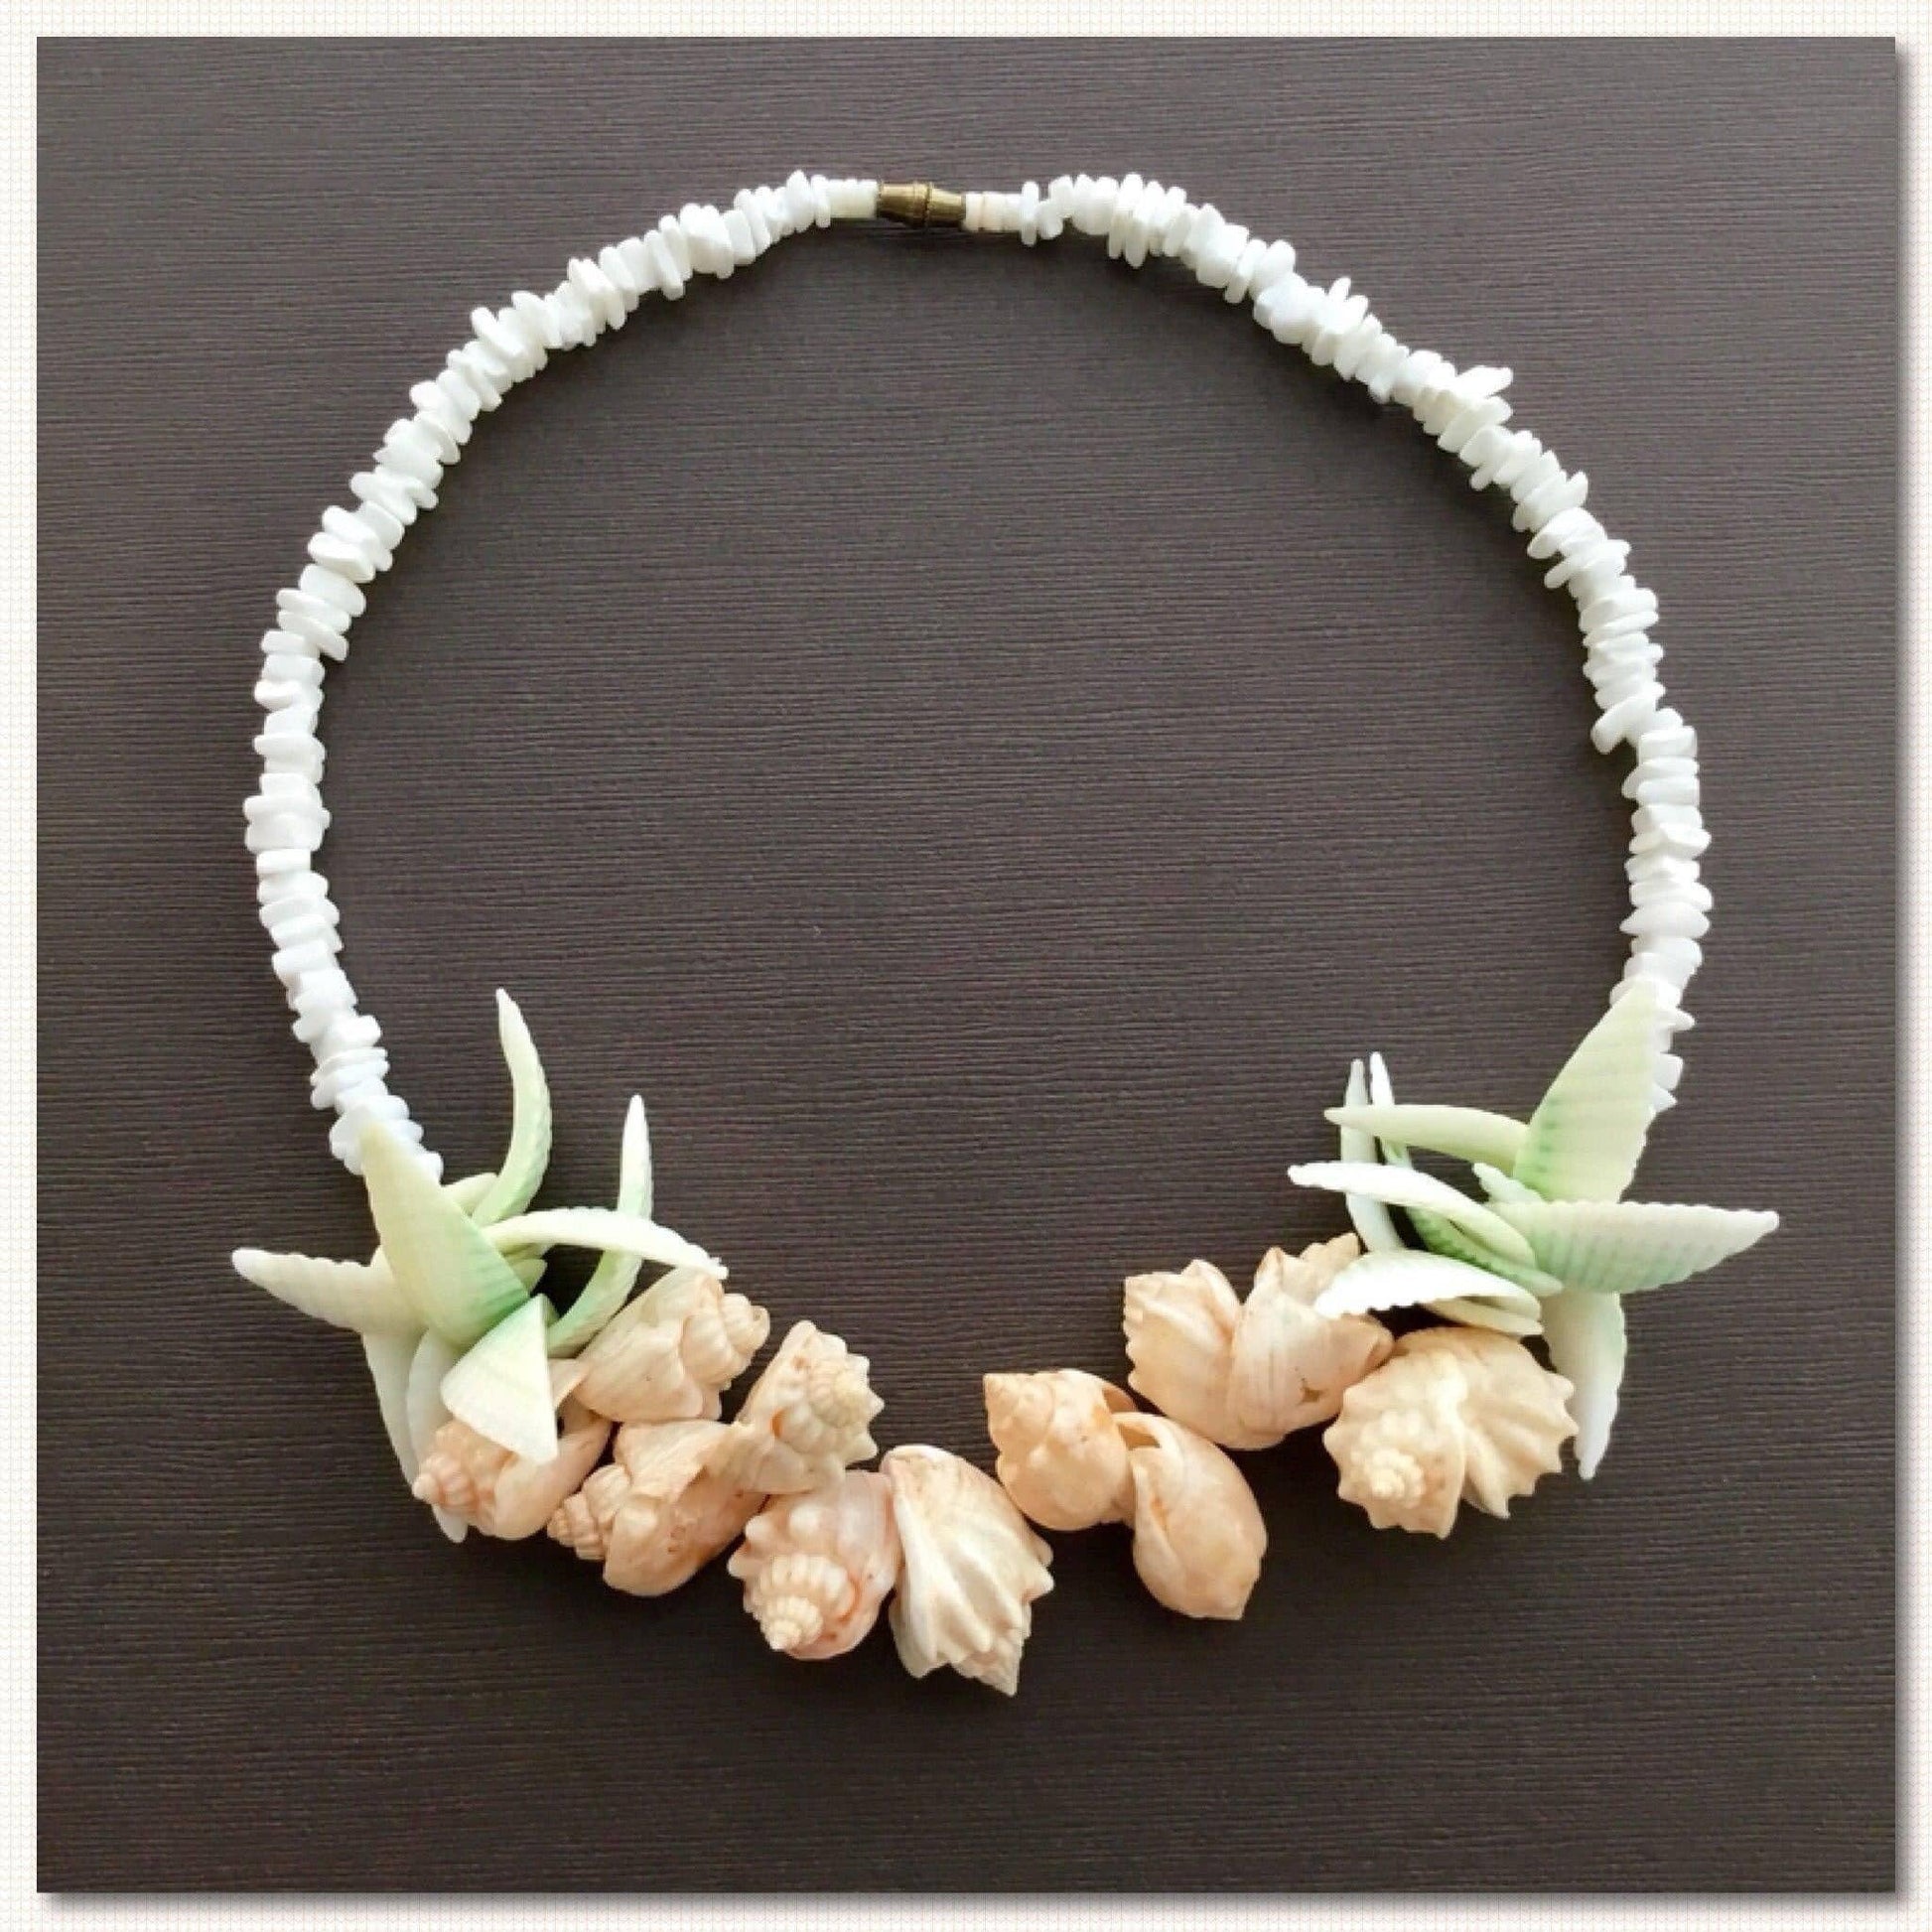 Gorgeous vintage multi pastel colored seashell statement necklace